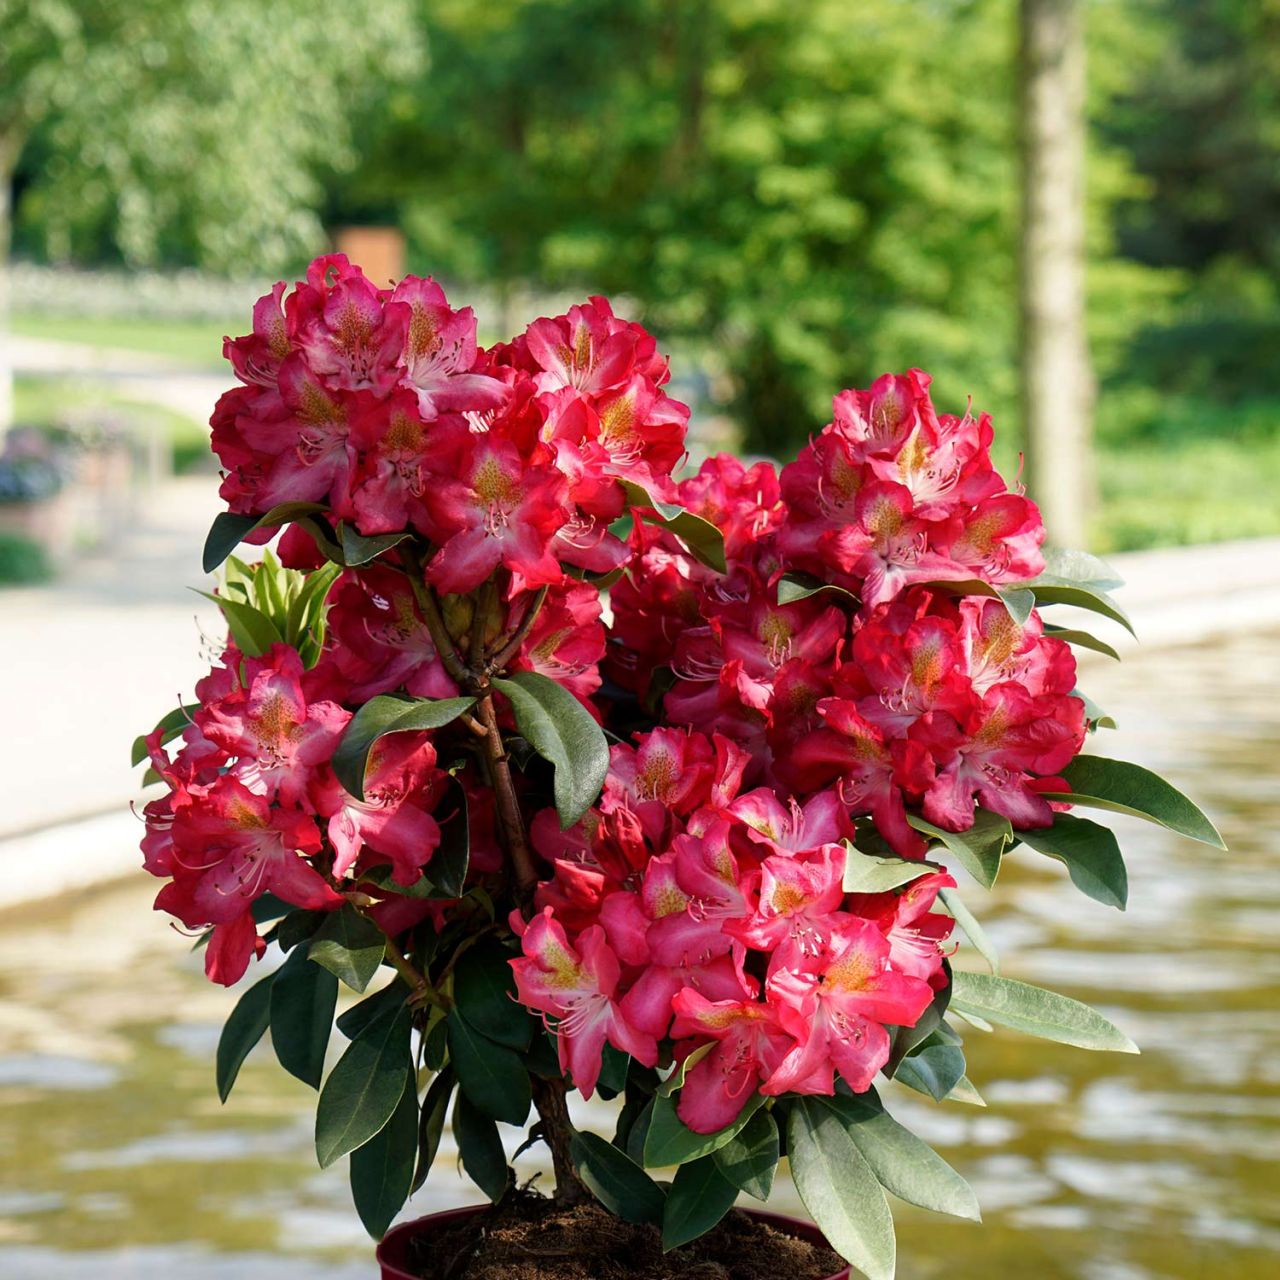 Kategorie <b>Rhododendron </b> - Rhododendron 'Junifeuer' - Easydendron®